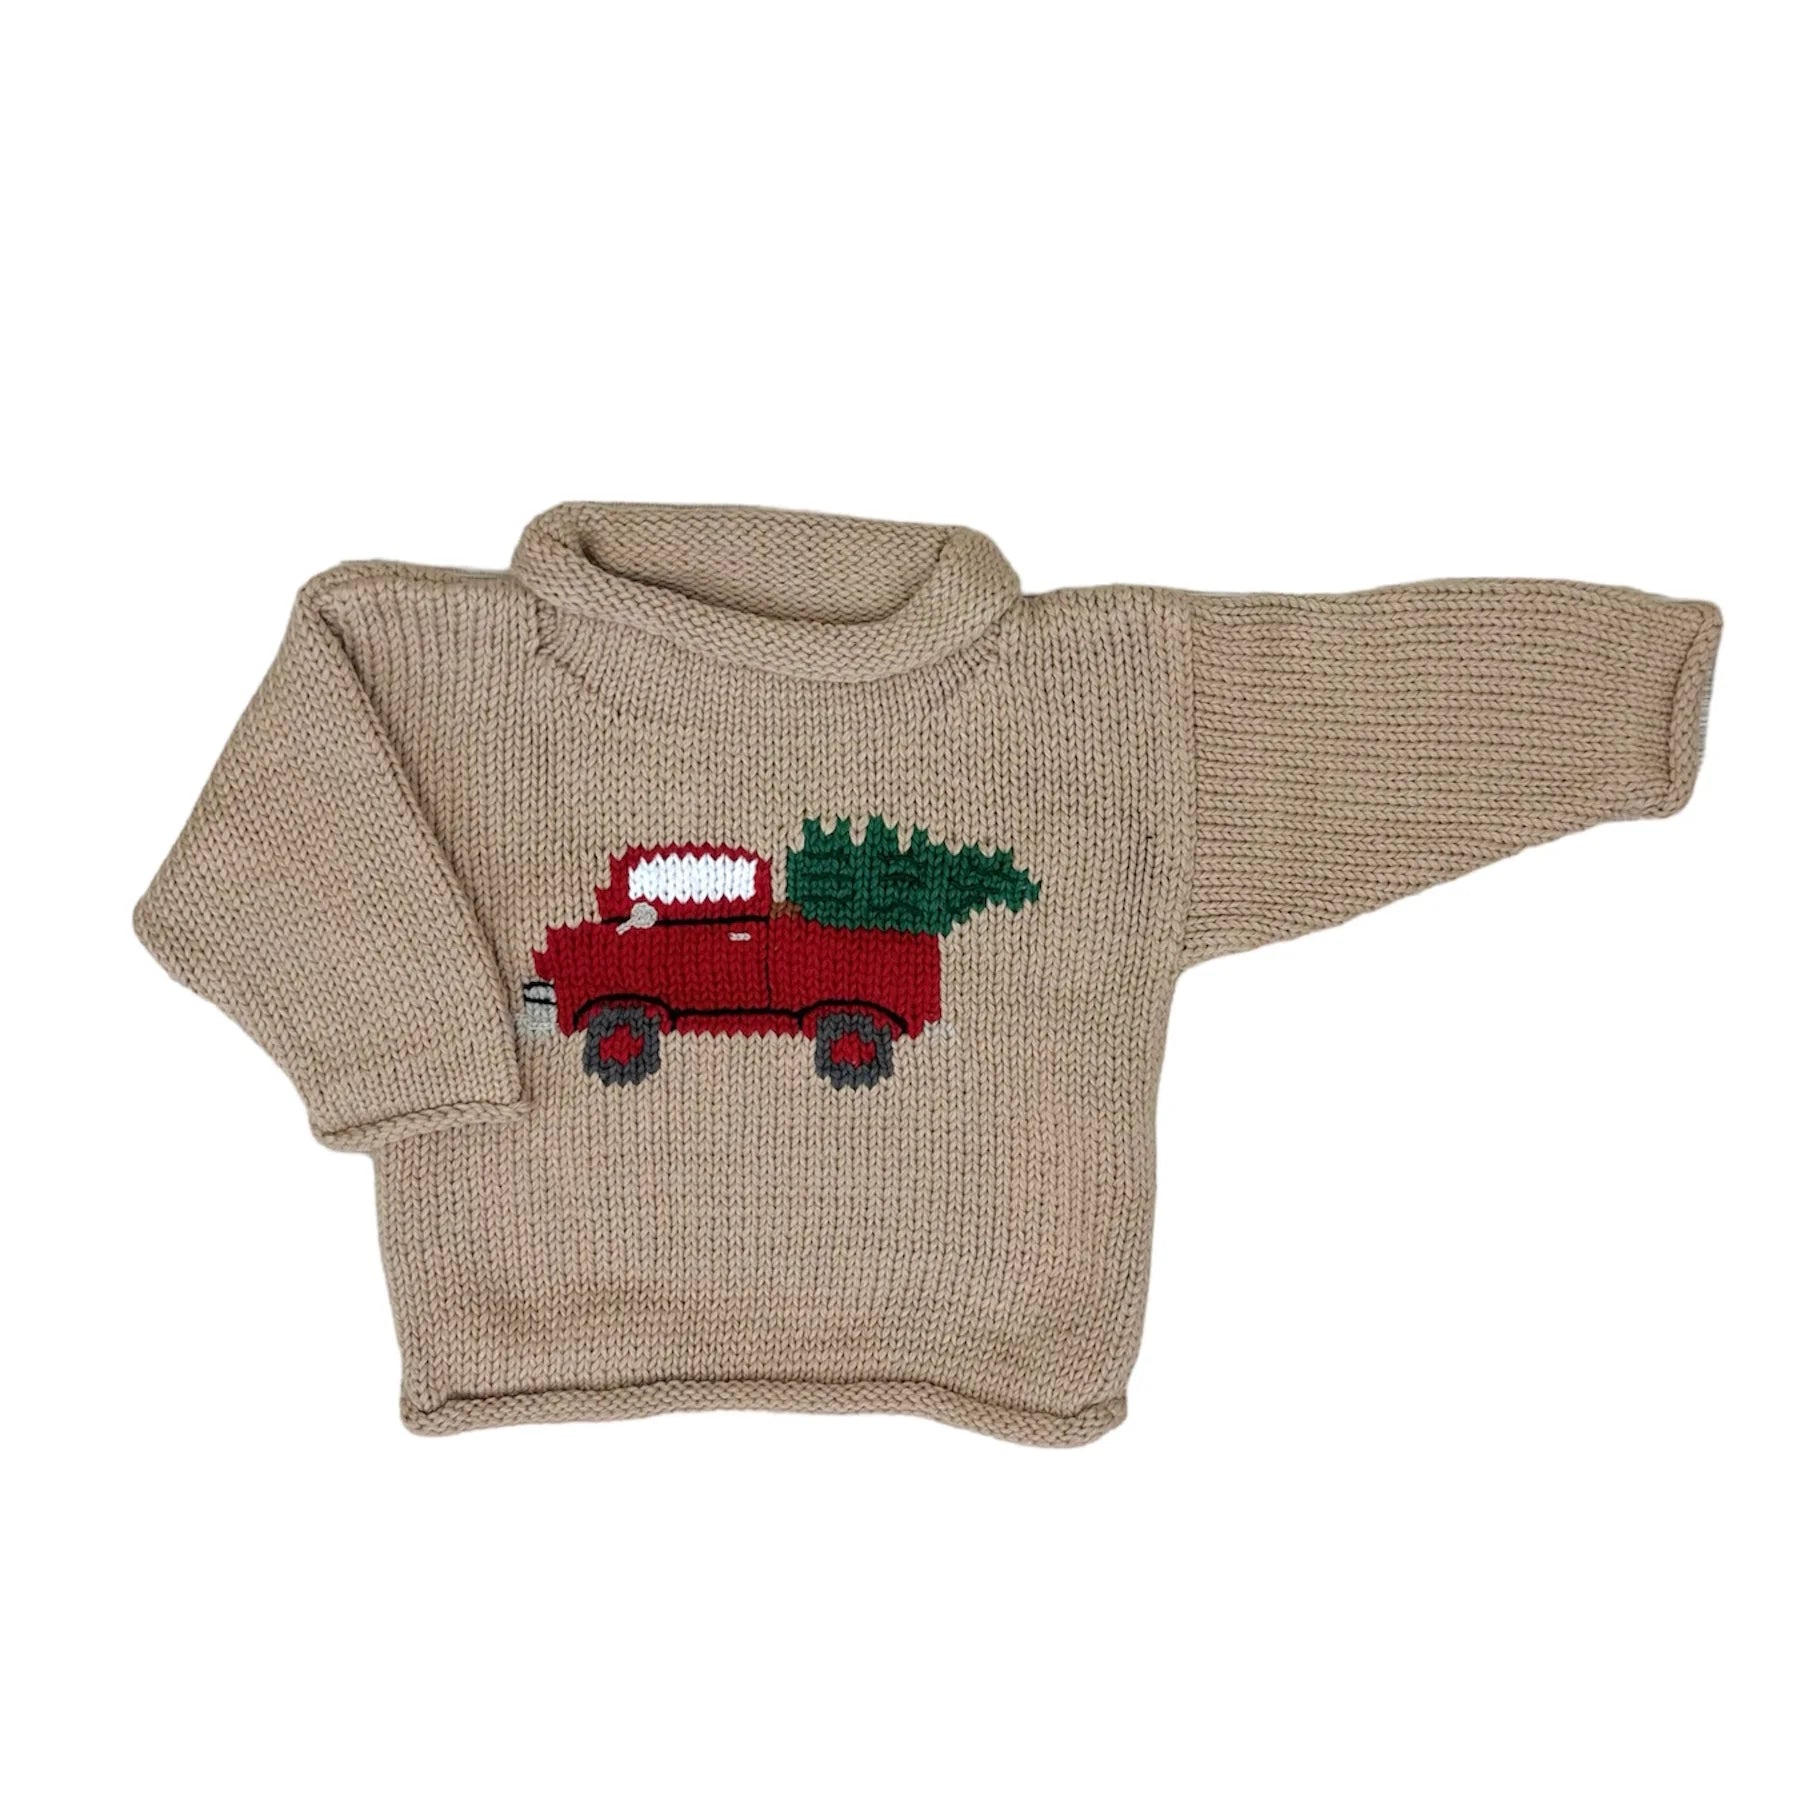 tan sweater with red pickup truck and tree